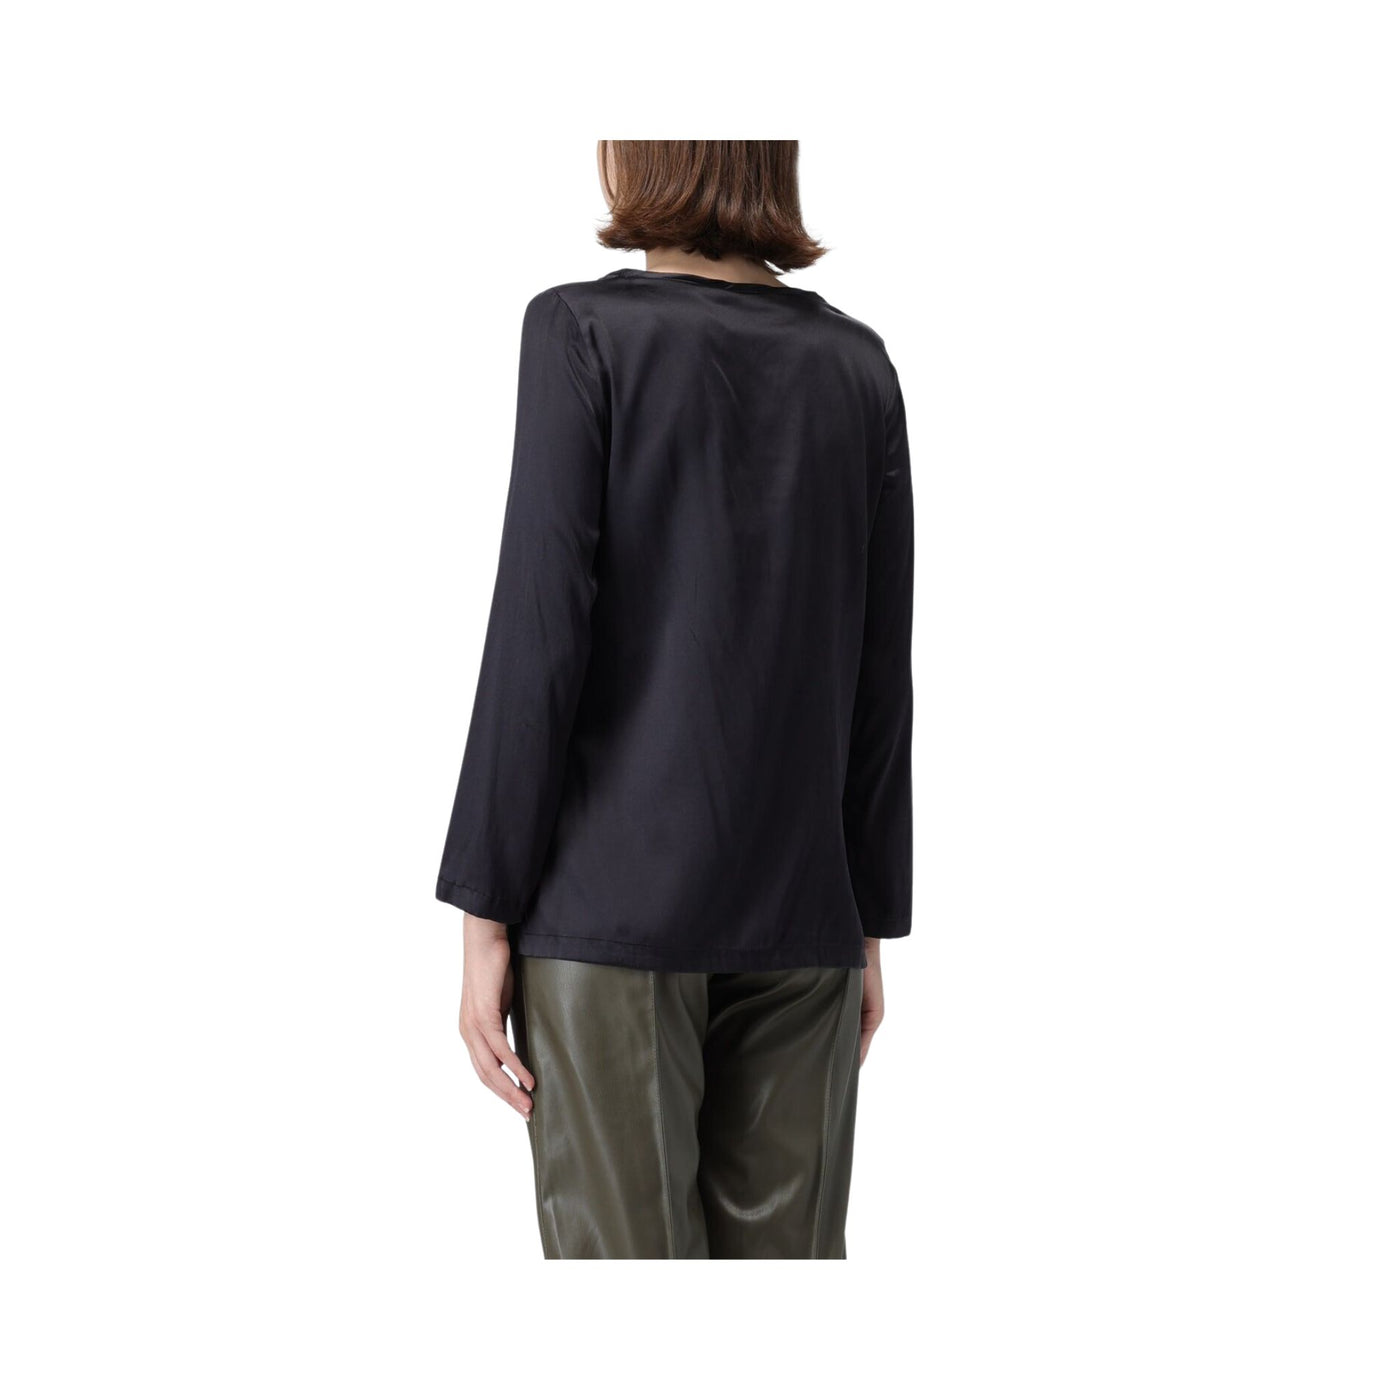 Women's blouse in solid color with wide neckline